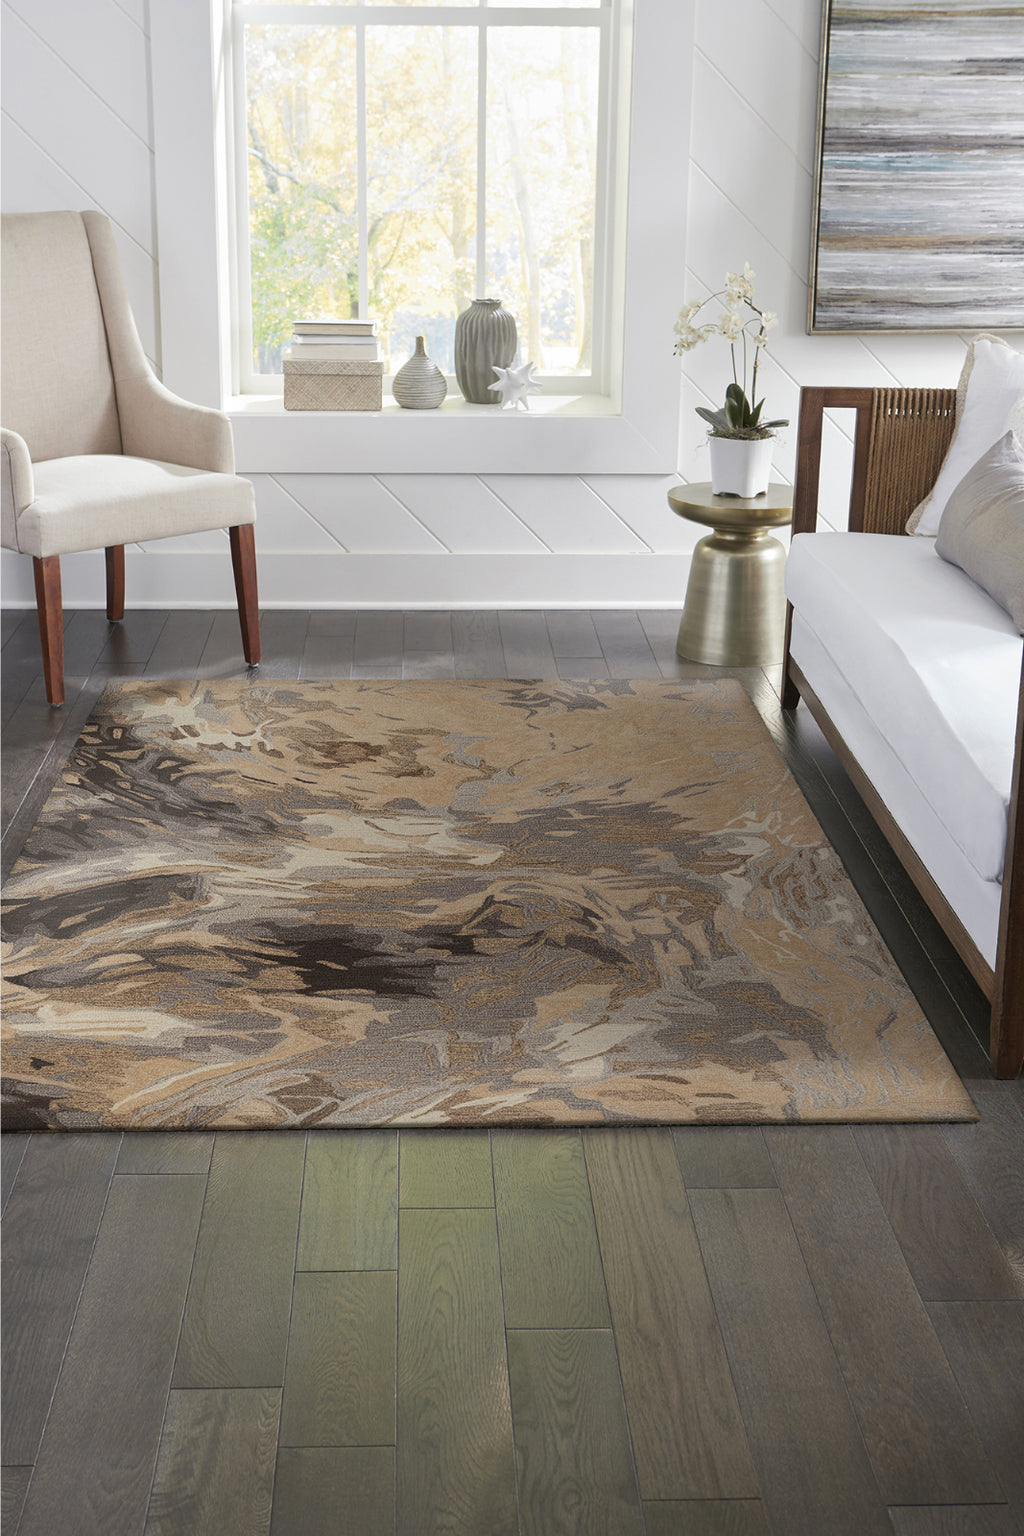 Trans Ocean Corsica 9151/12 Storm Natural Area Rug by Liora Manne Room Scene Image Feature